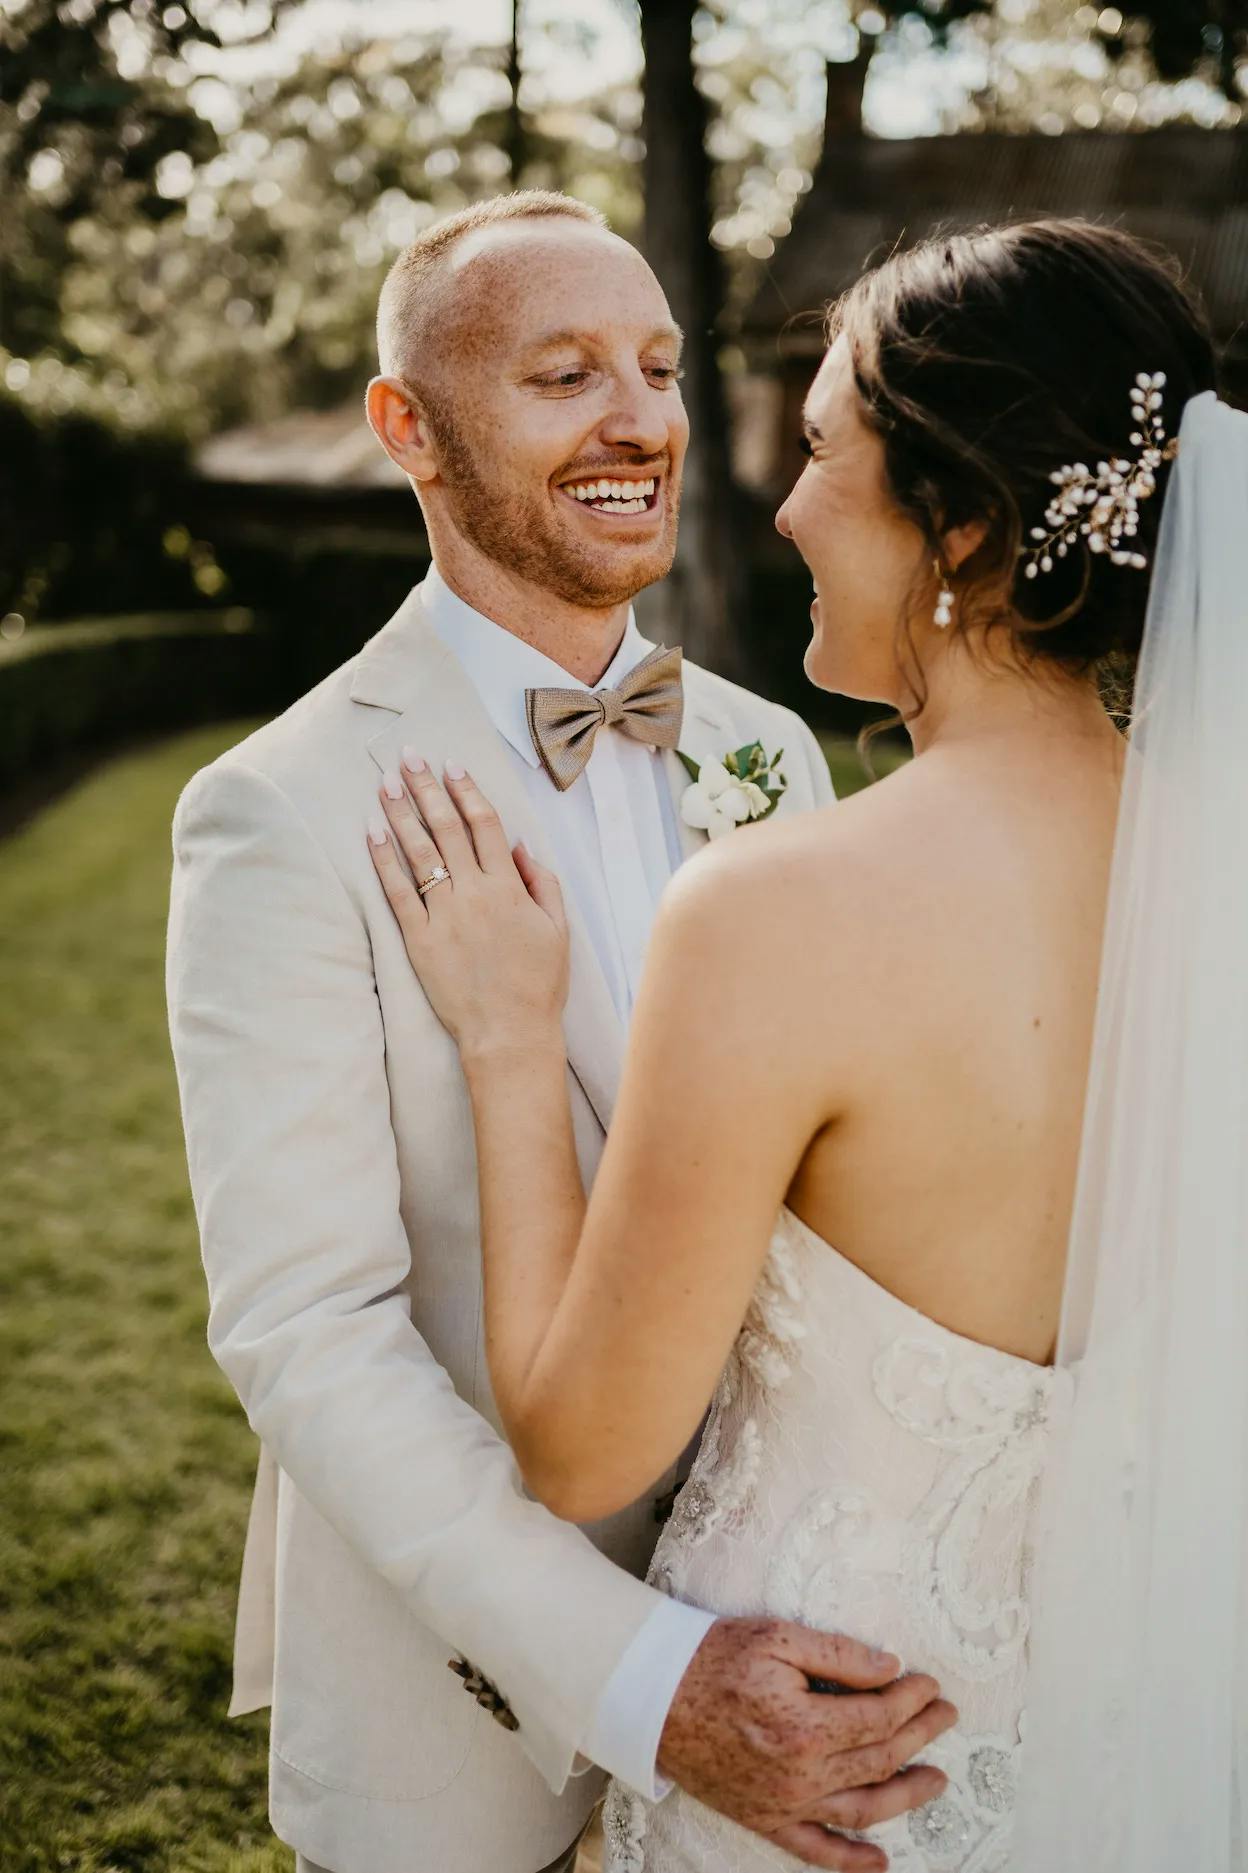 A bride and groom share a joyful moment outdoors on their wedding day. The groom, in a light-colored suit and bow tie, smiles at the bride, who is wearing a strapless gown and veil with sparkling hair accessories. They are holding each other lovingly, surrounded by greenery.